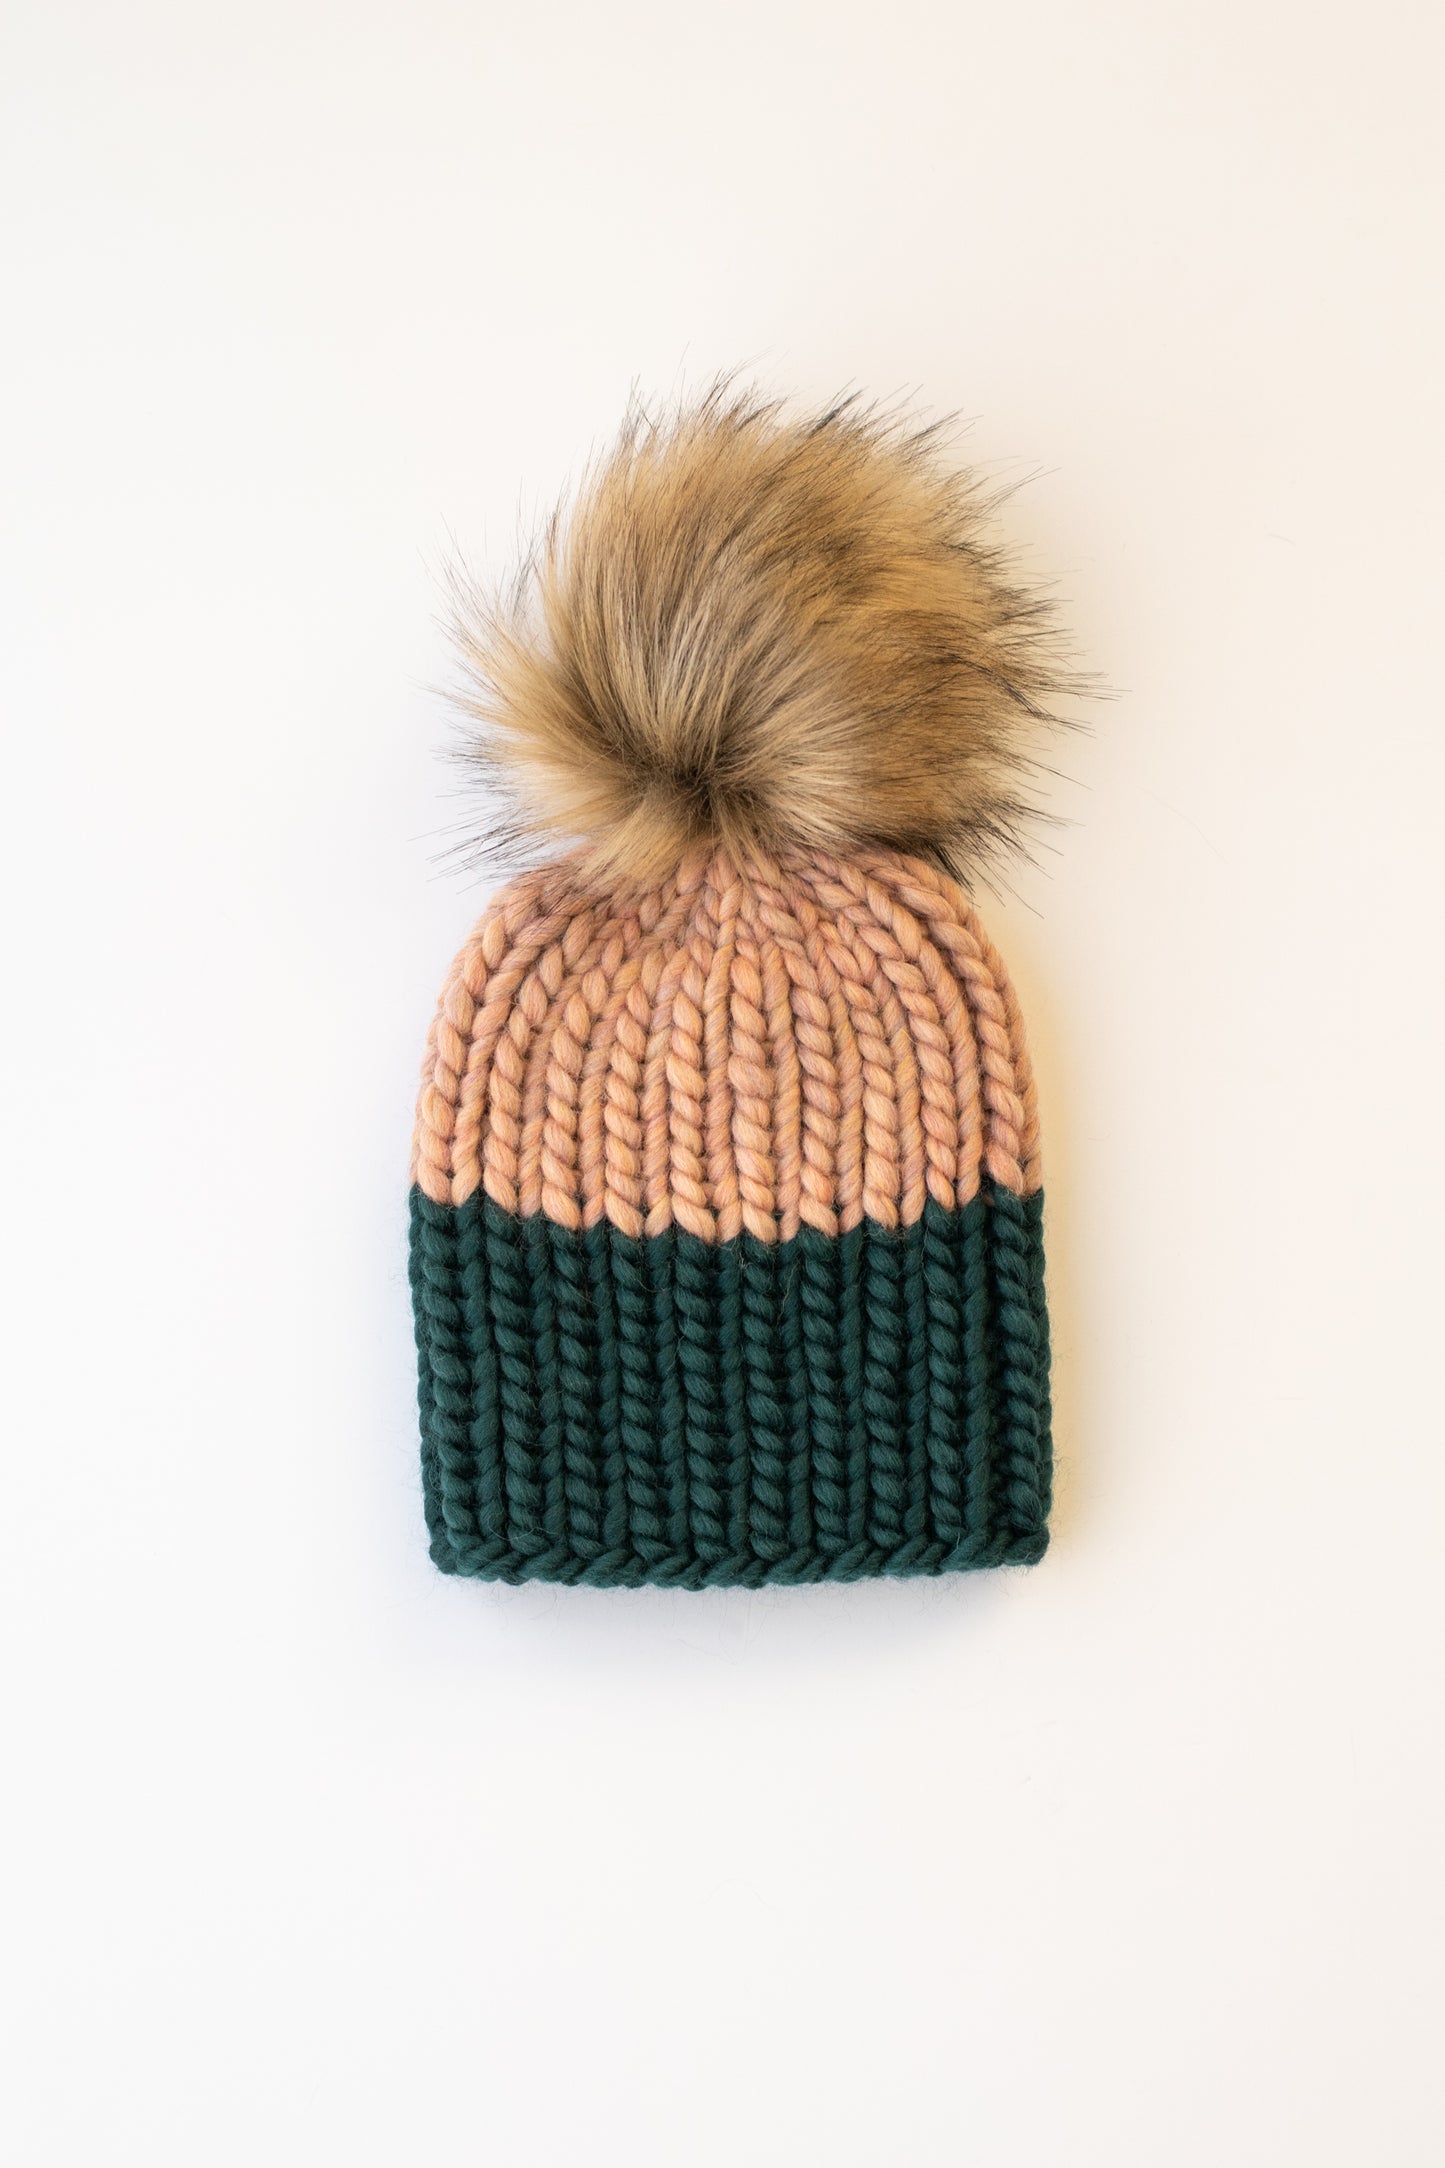 Child and Toddler Size Ribbed Knit Colorblock Peruvian Wool Hat with Faux Fur Pom Pom (More Colors Available)